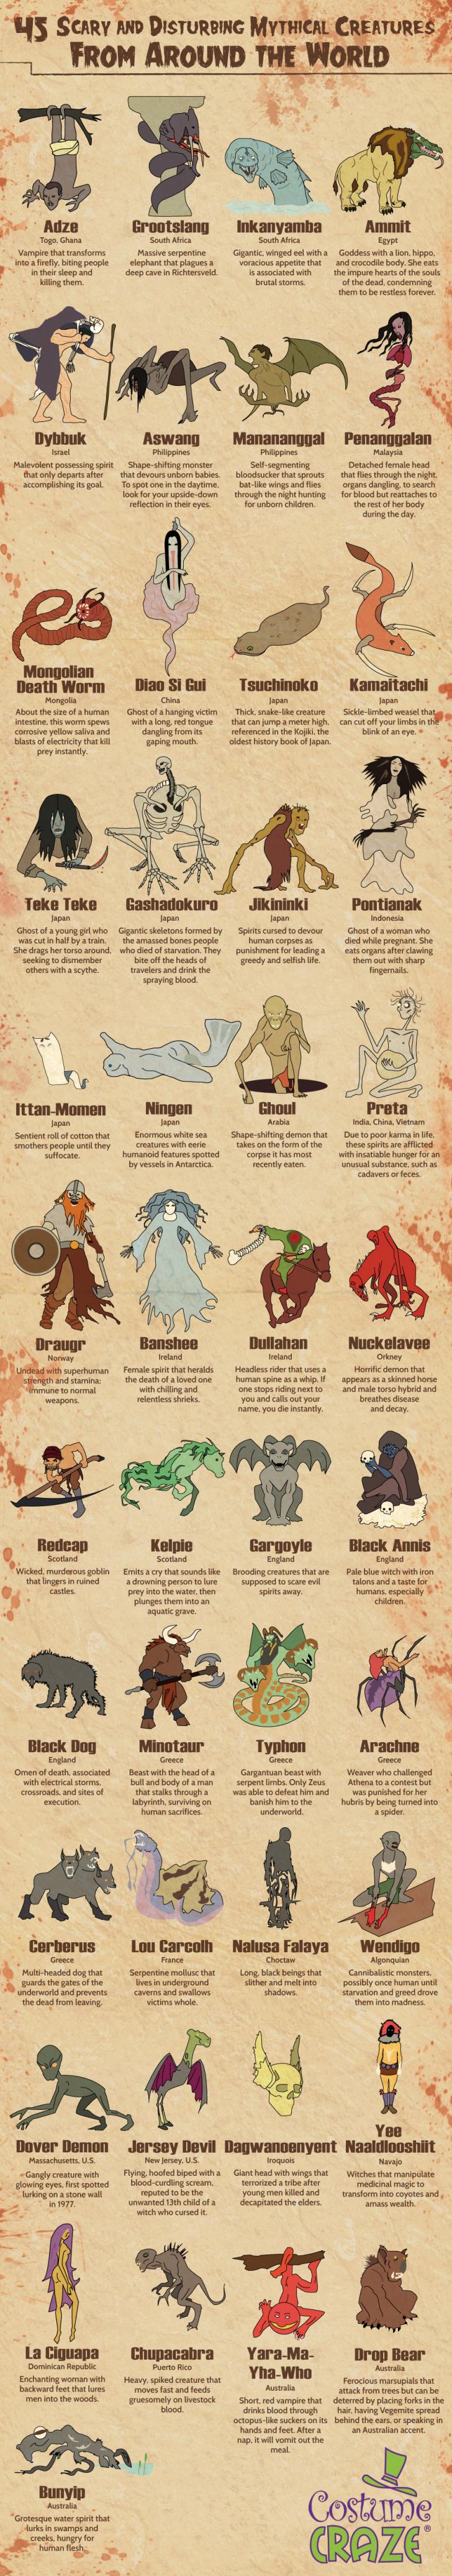 Every terrifying mythical creature from around the world.